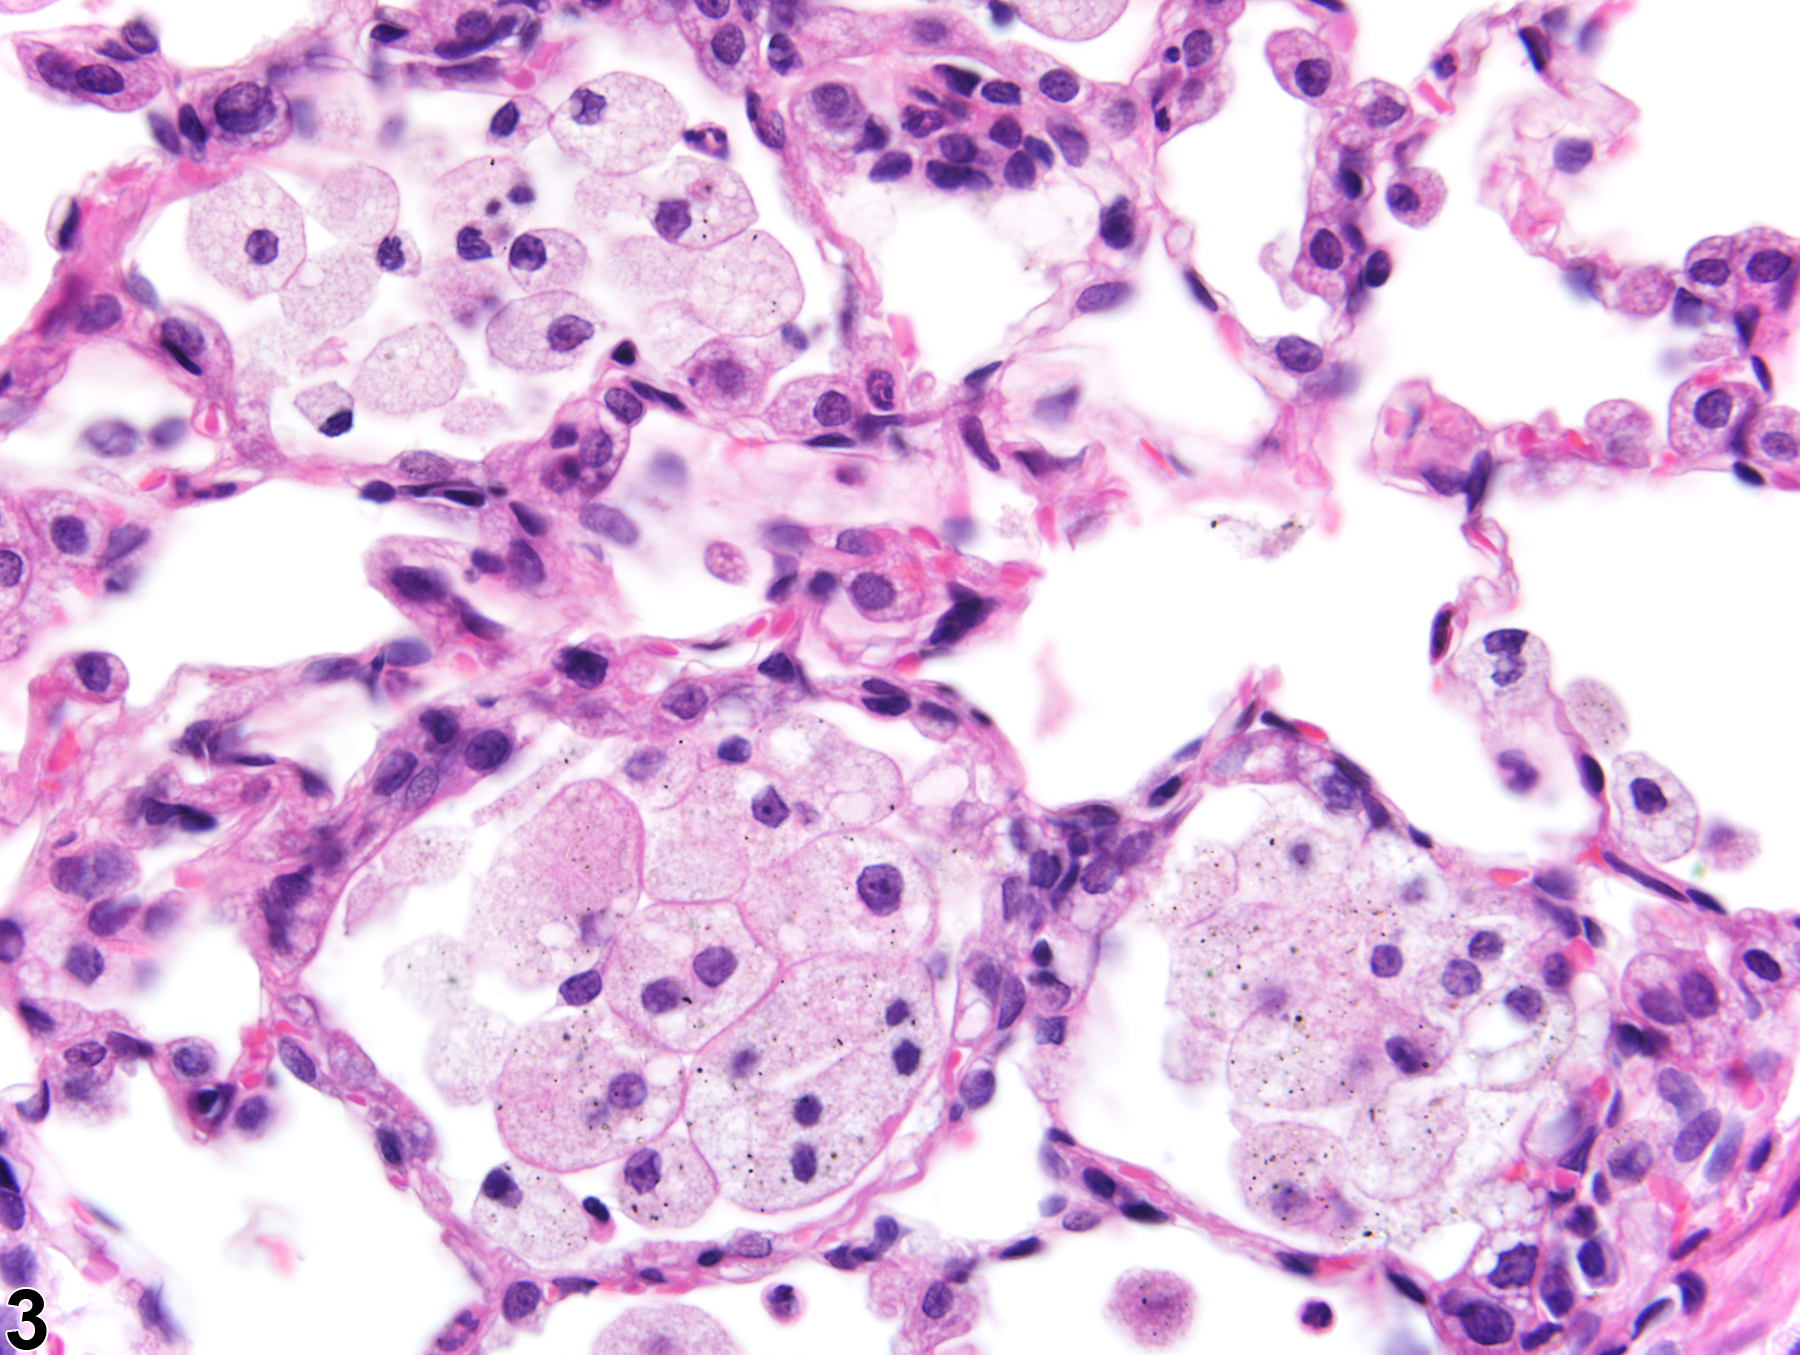 Image of foreign material in the lung from a male Harlan Sprague-Dawley rat in a subchronic study